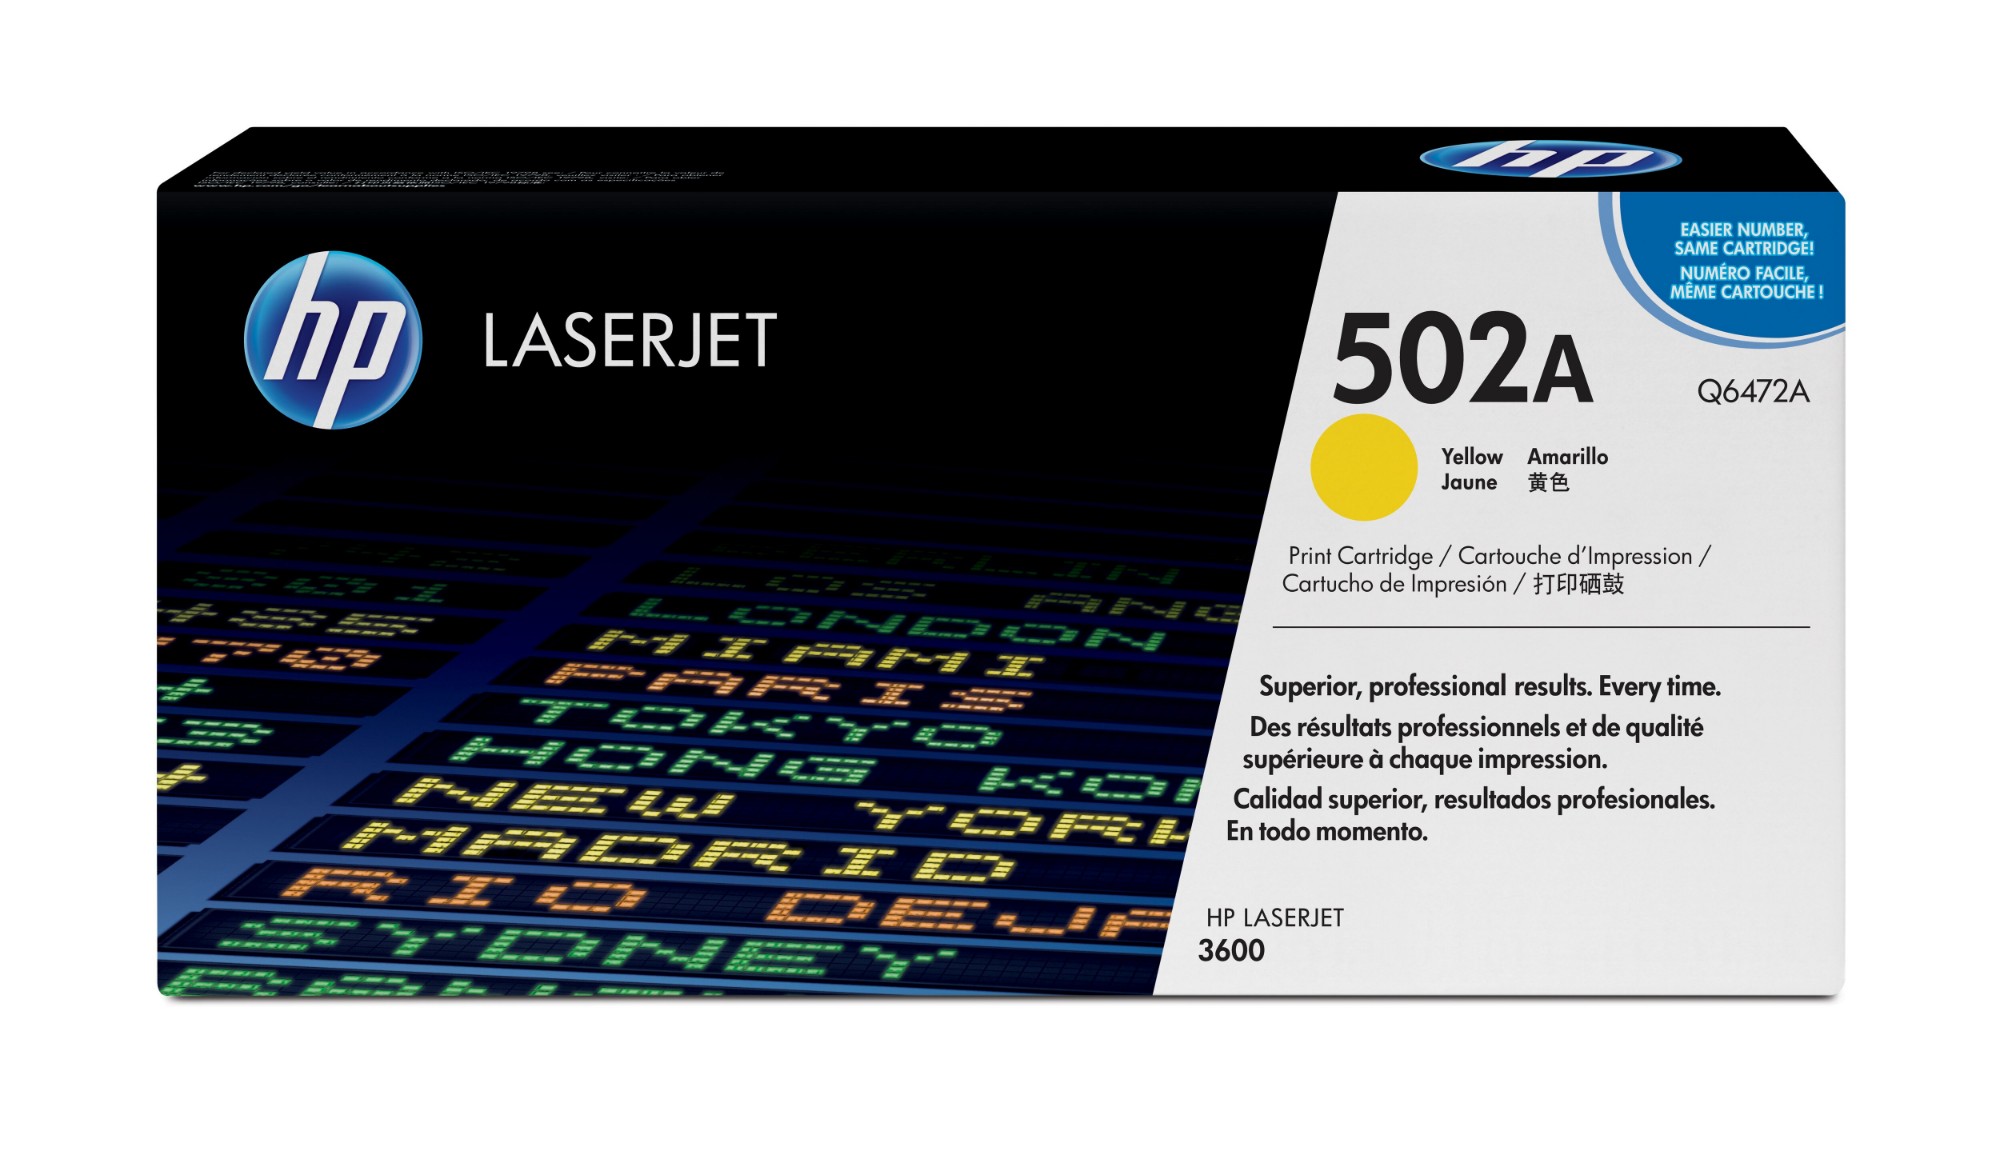 HP Q6472A/502A Toner cartridge yellow, 4K pages/5% for HP Color LaserJet 3600